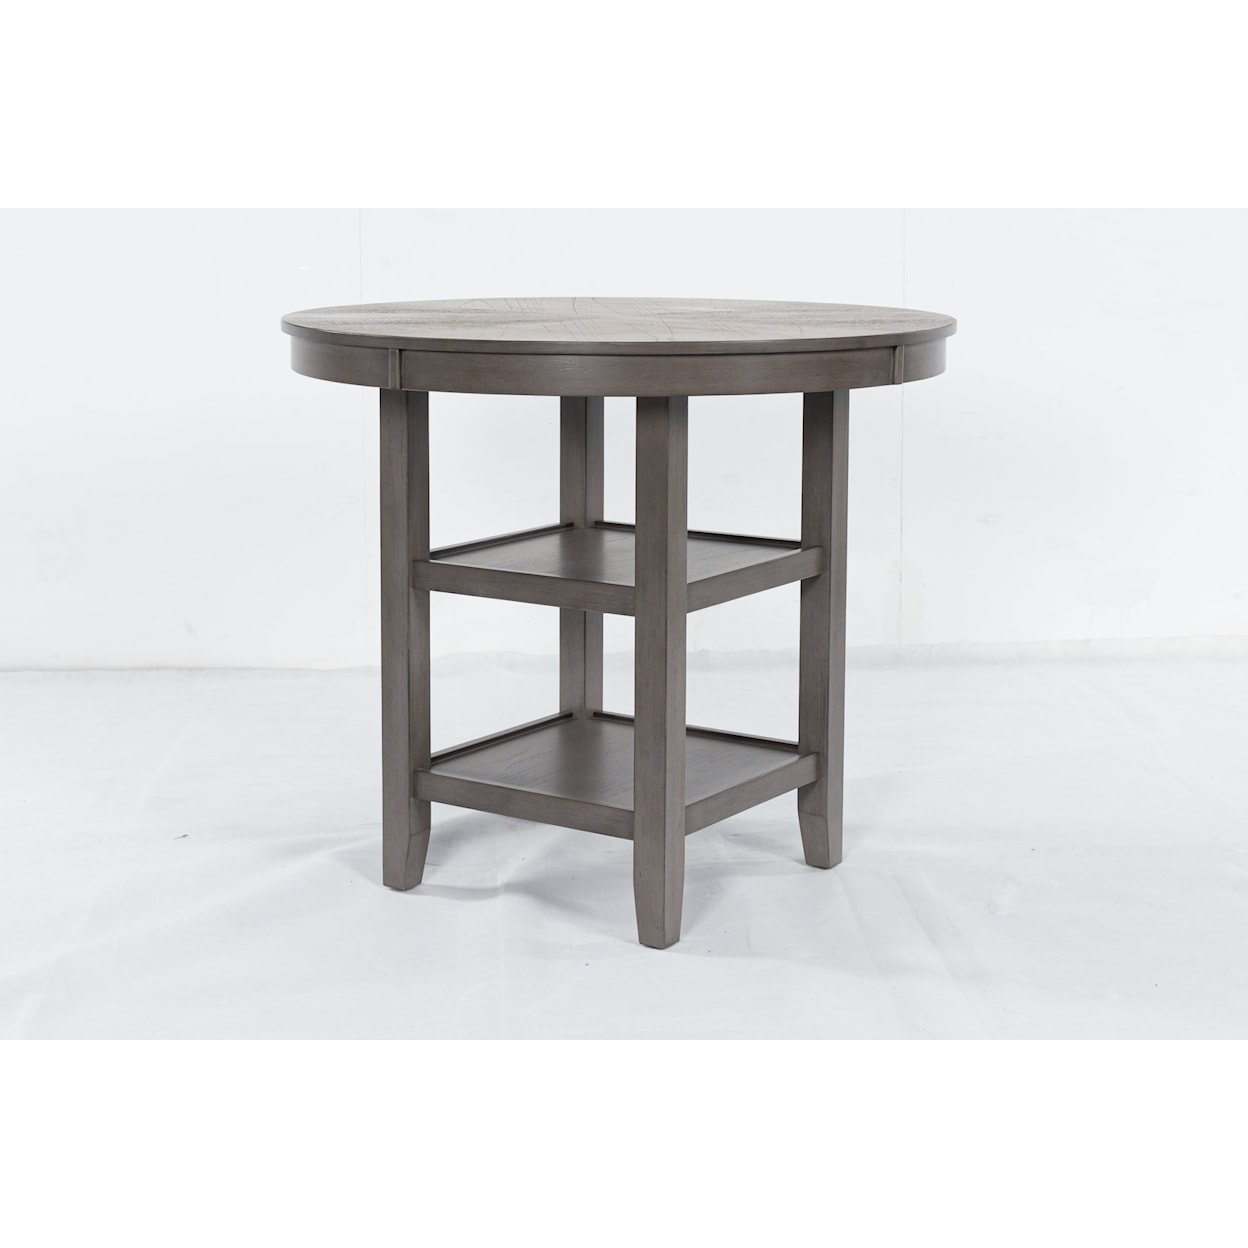 Signature Design by Ashley Furniture Wrenning Counter Dining Table & 4 Stools (Set of 5)